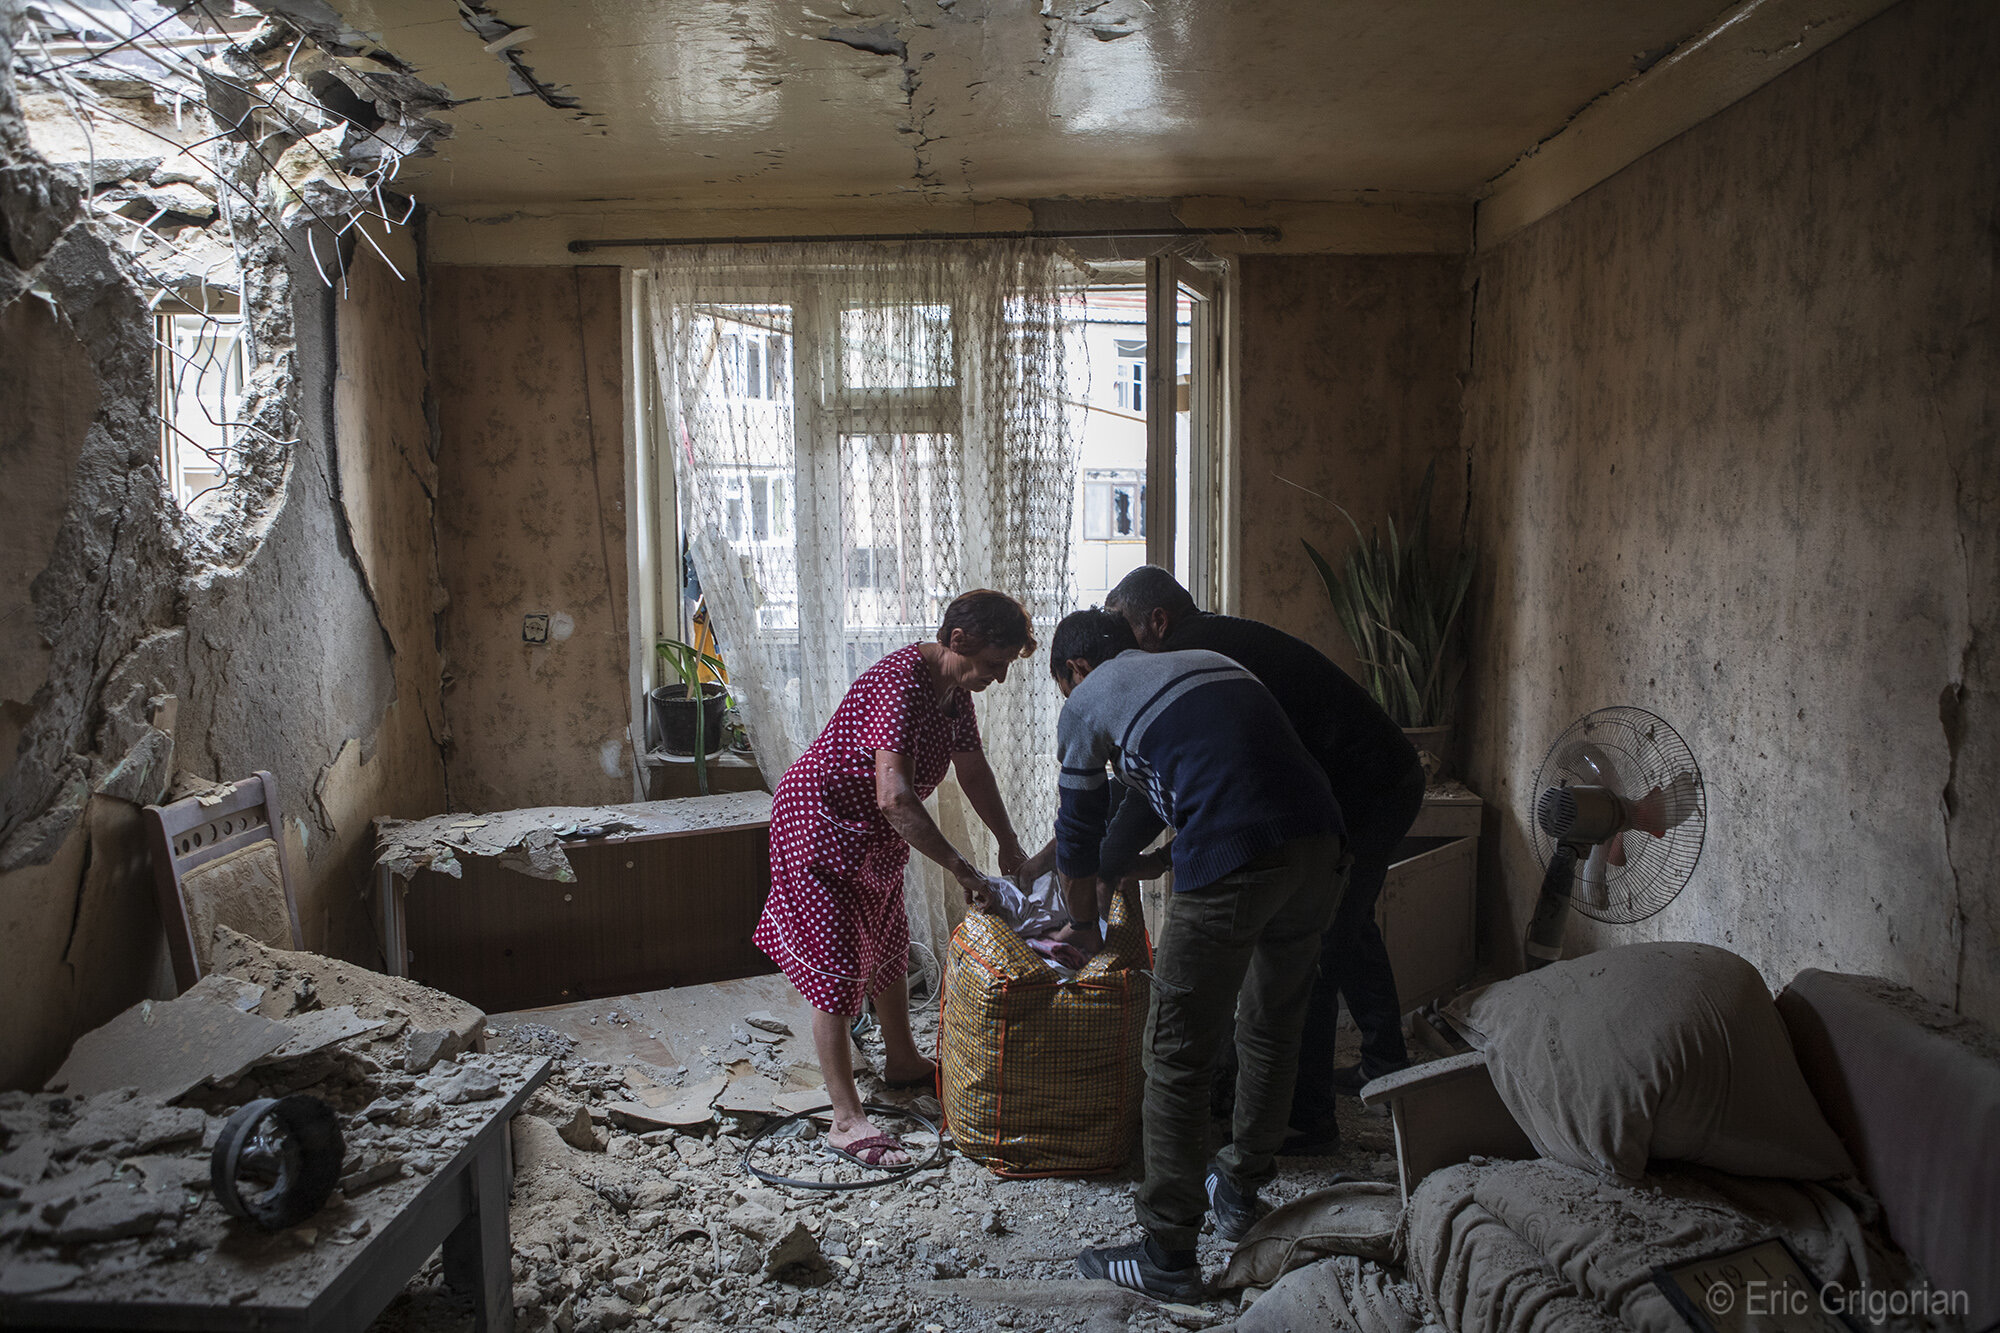  The morning after shelling in Stepanakert, residents of the buildings that were severely damaged return home to salvage whatever is left of their belongings. 